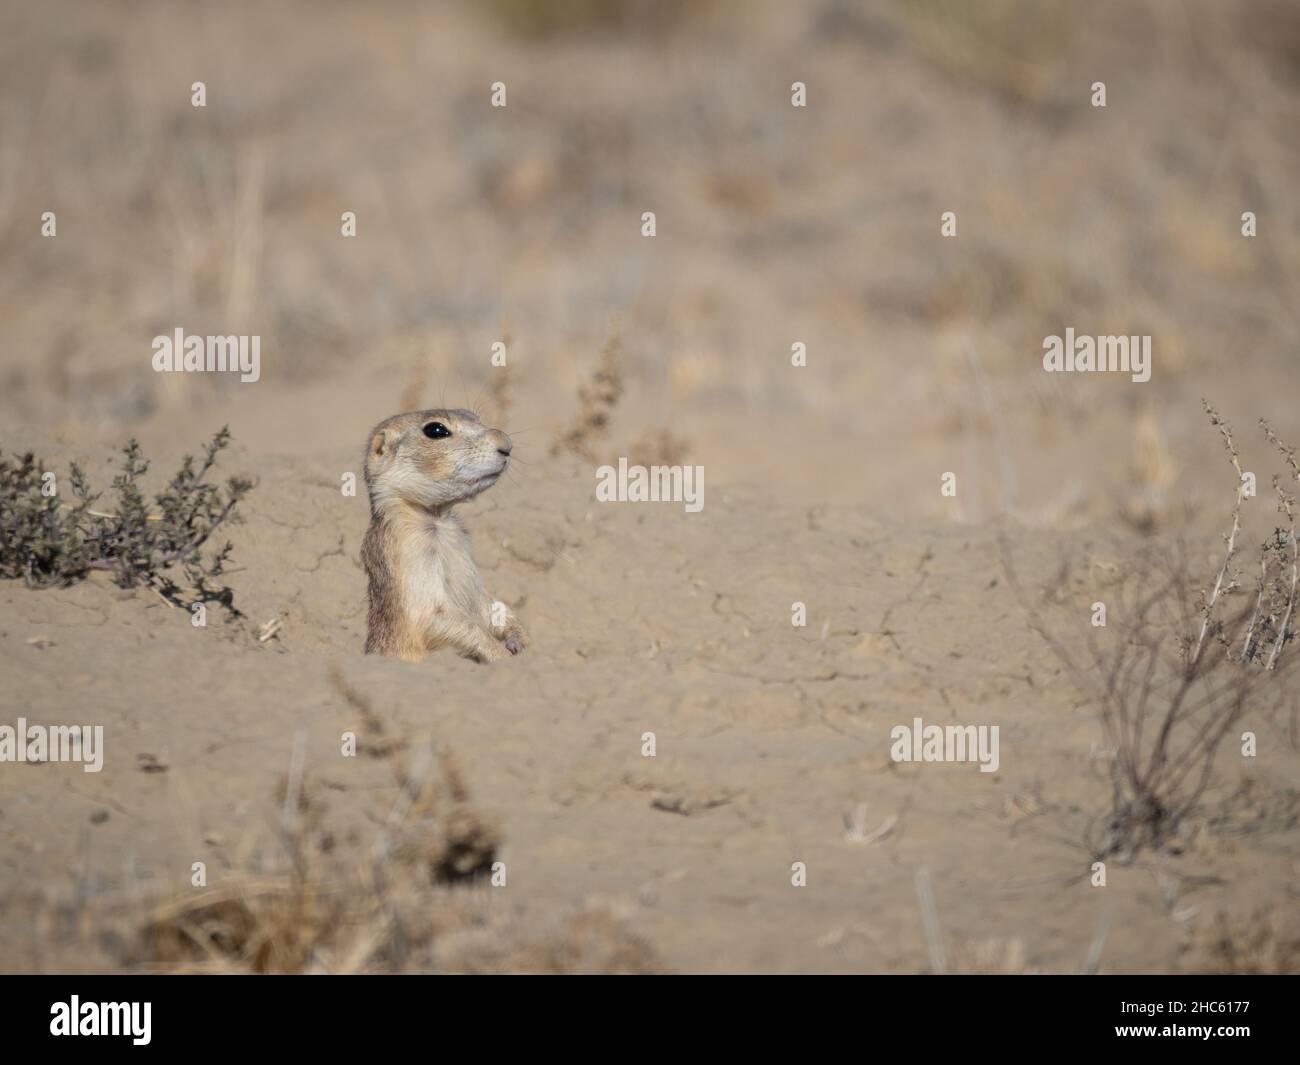 Gunnison's prairie dog standing in a burrow with only its head, chest, and arms visible. Photographed near Chaco Canyon, New Mexico. Stock Photo